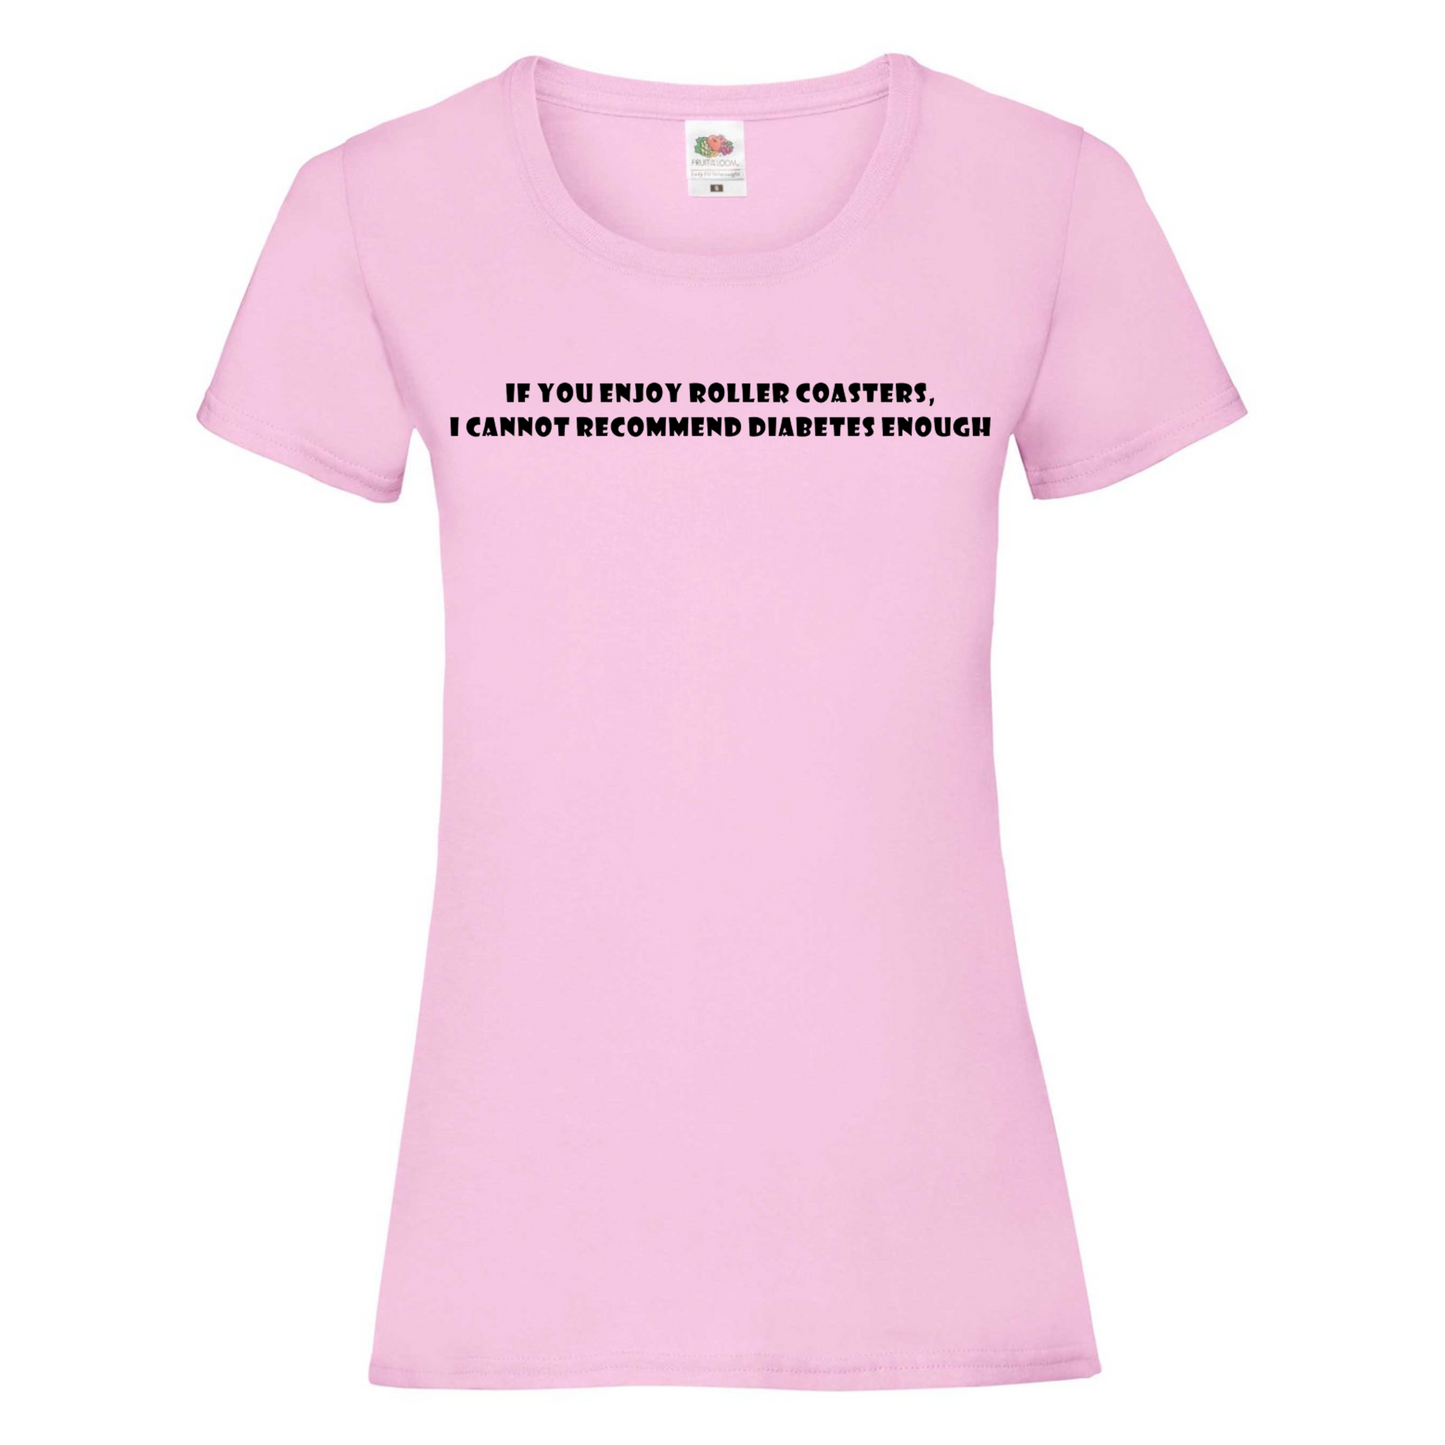 If You Enjoy Roller Coasters, I Cannot Recommend Diabetes Enough Women's T Shirt